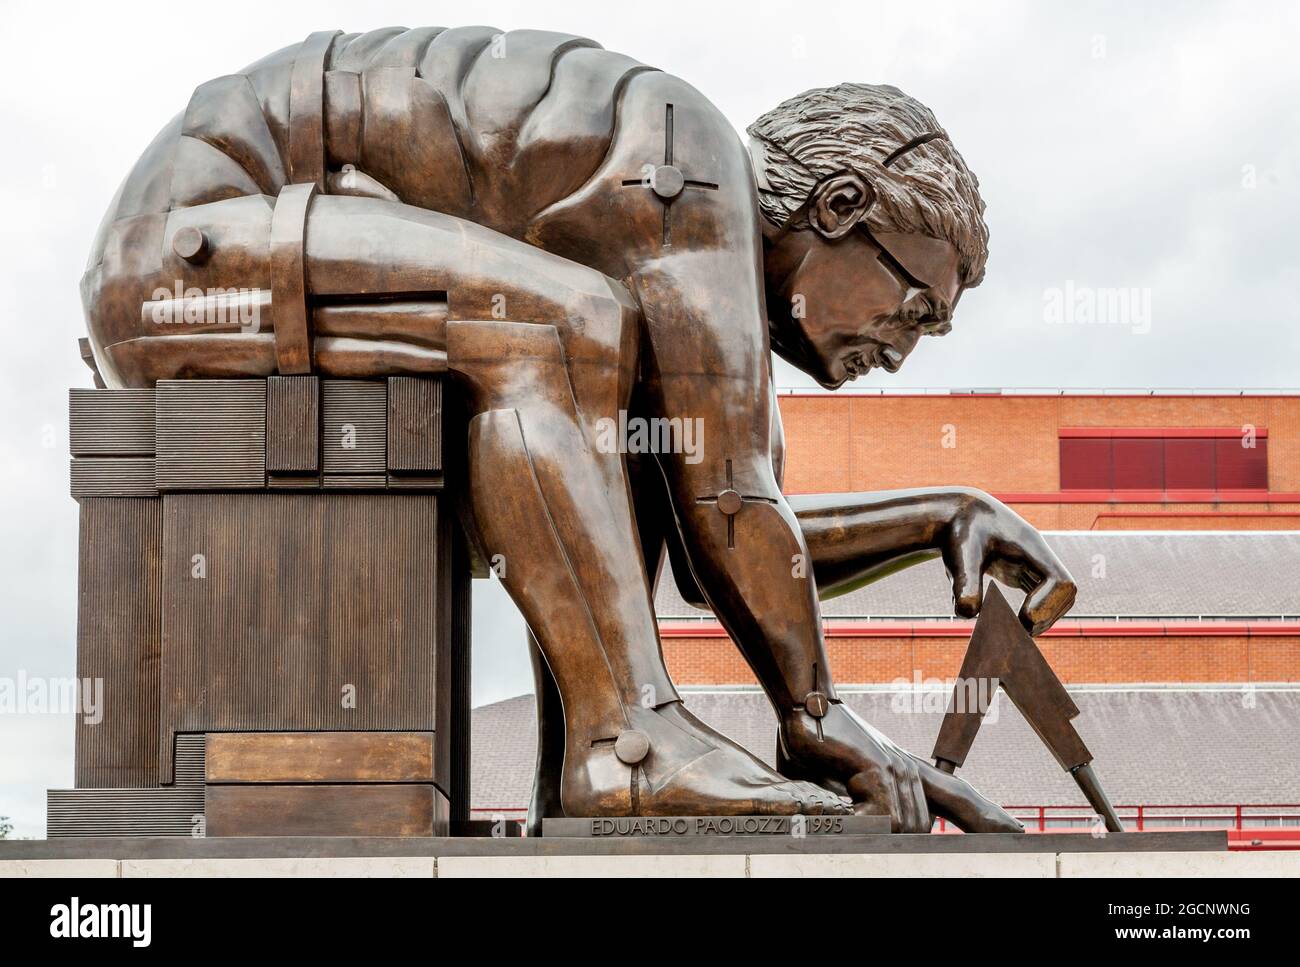 LONDON, UNITED KINGDOM - Oct 17, 2007: Eduardo Paolozzi's bronze sculpture of Newton at British Museum London embodying his Laws of Motion Theories of Stock Photo